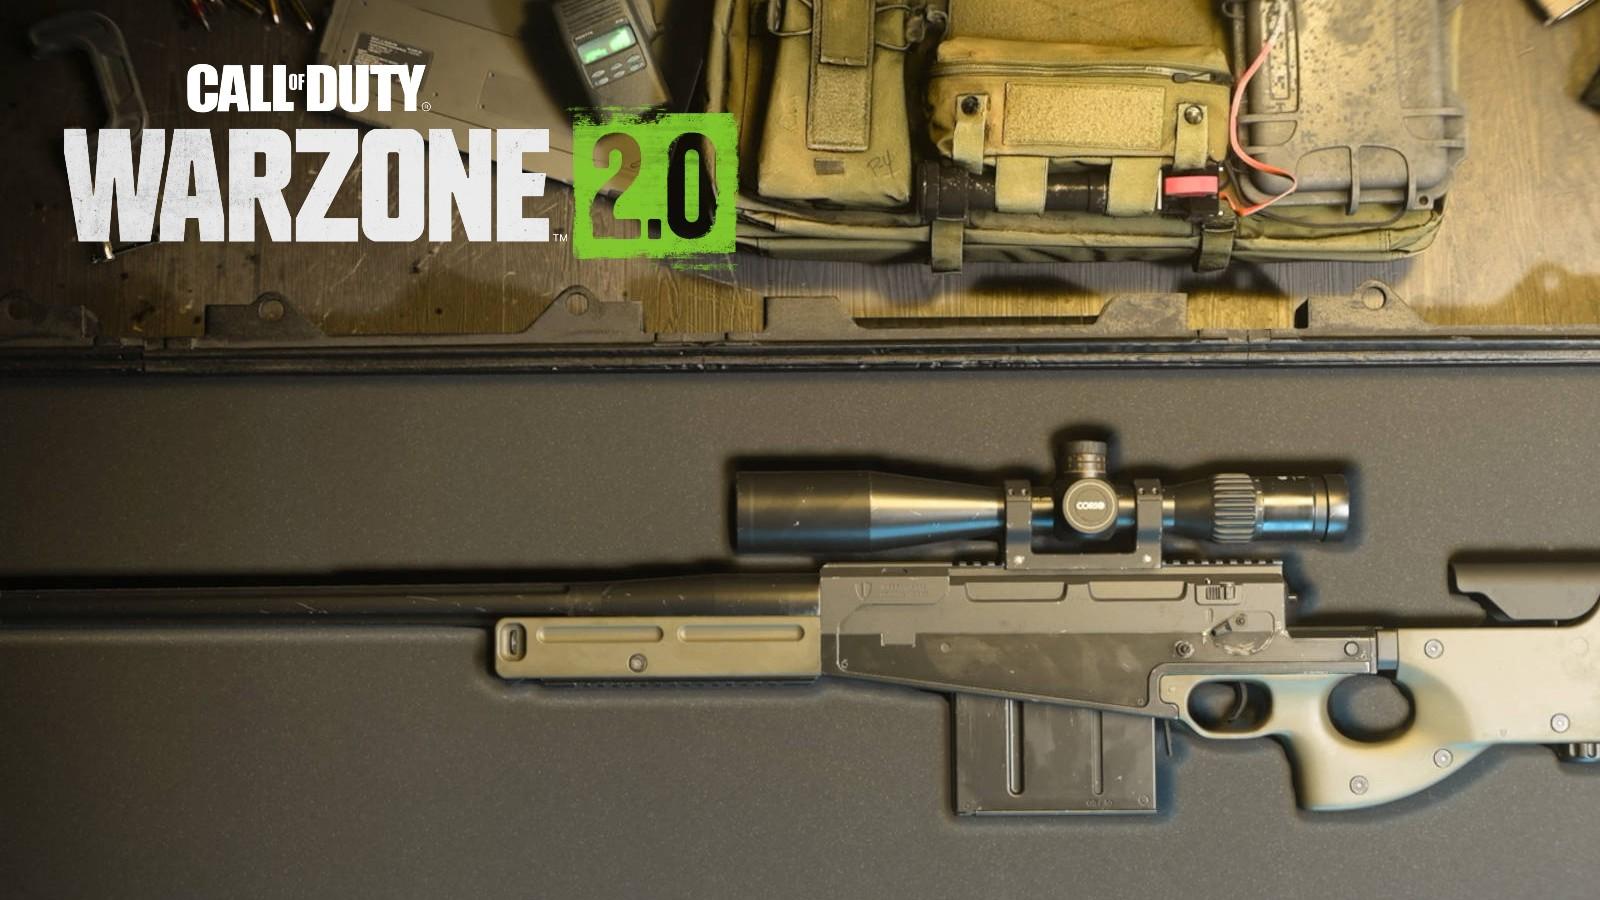 How to have three weapons in Warzone 2.0